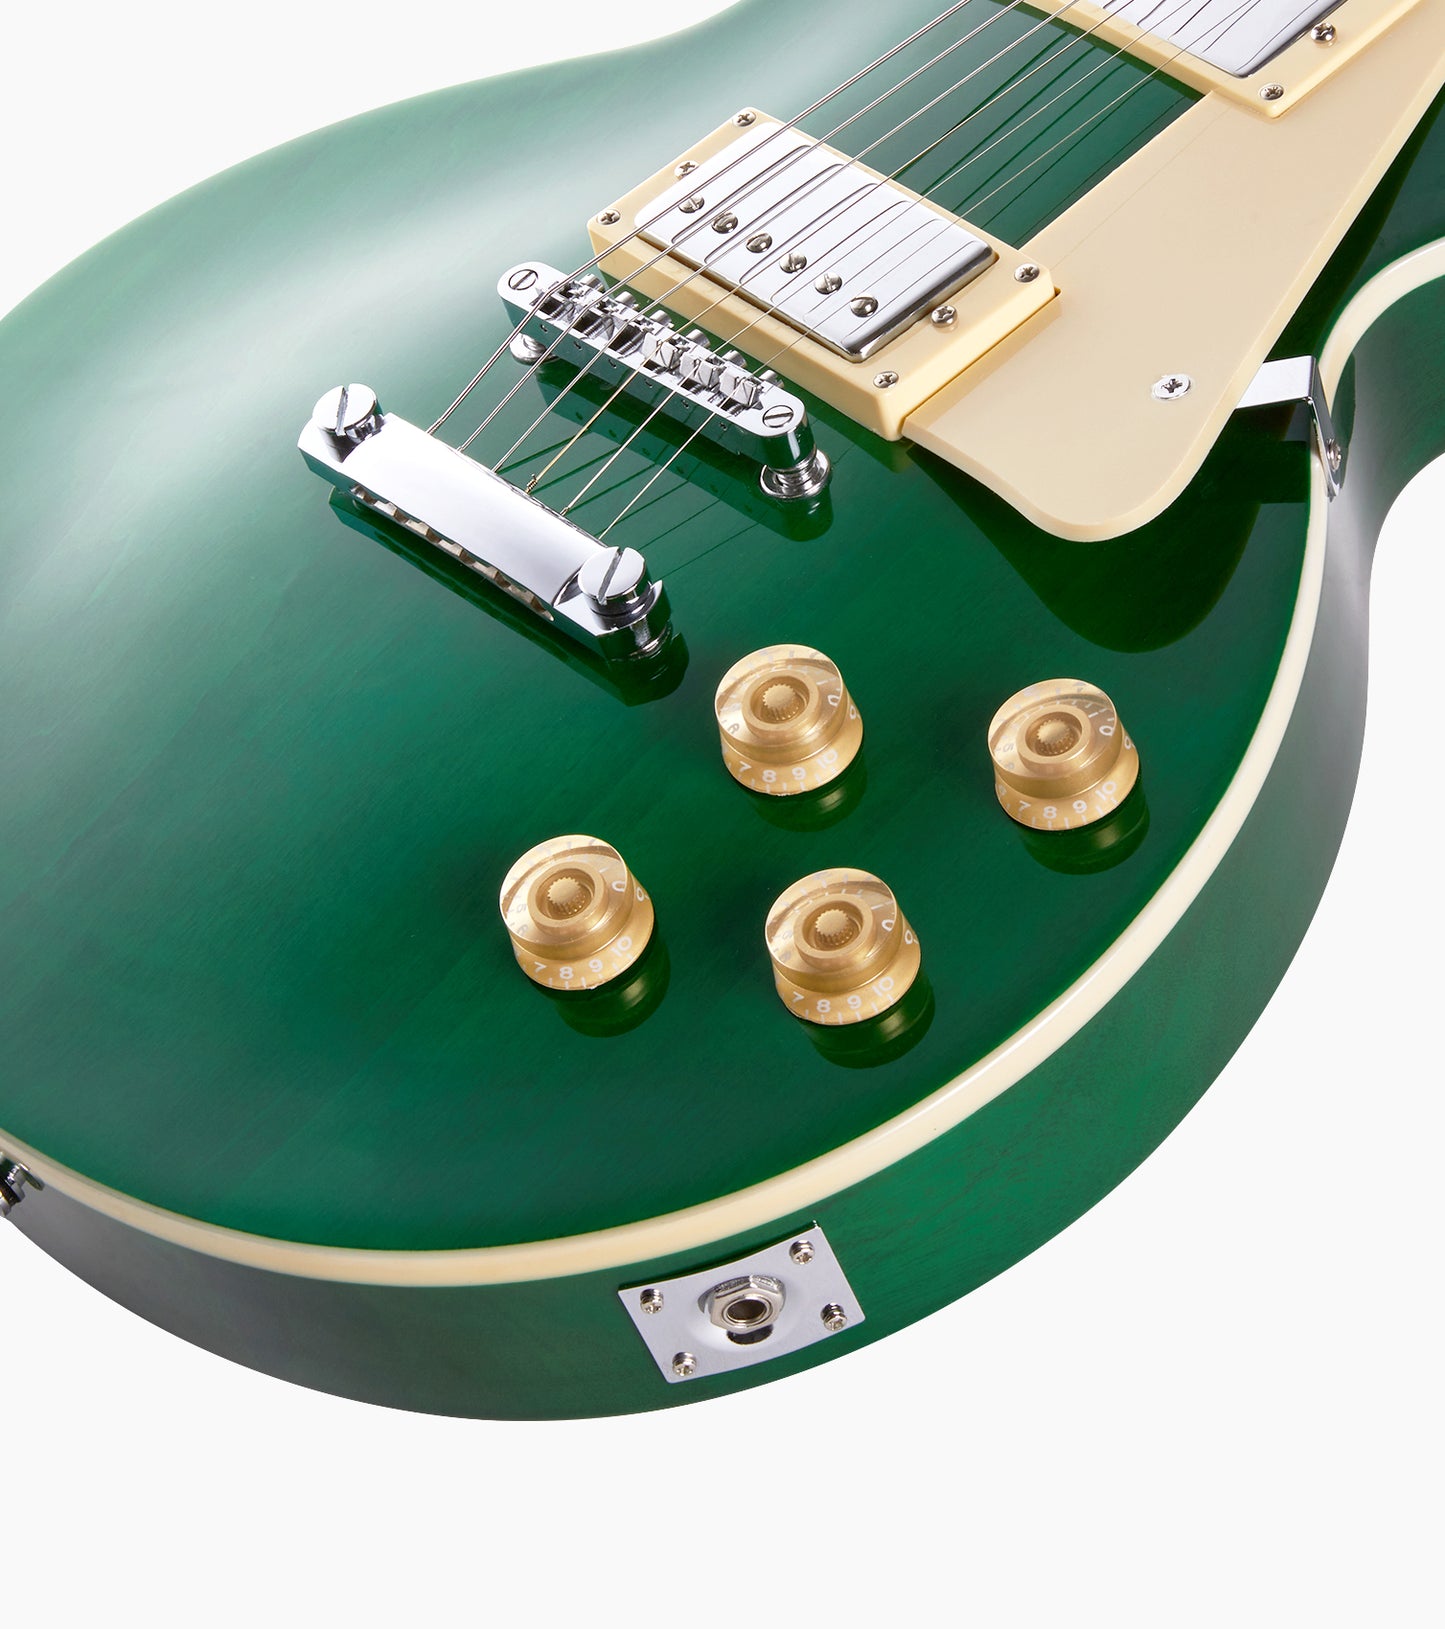 39 inch Les Paul Electric Guitar Green - Output jack and controls